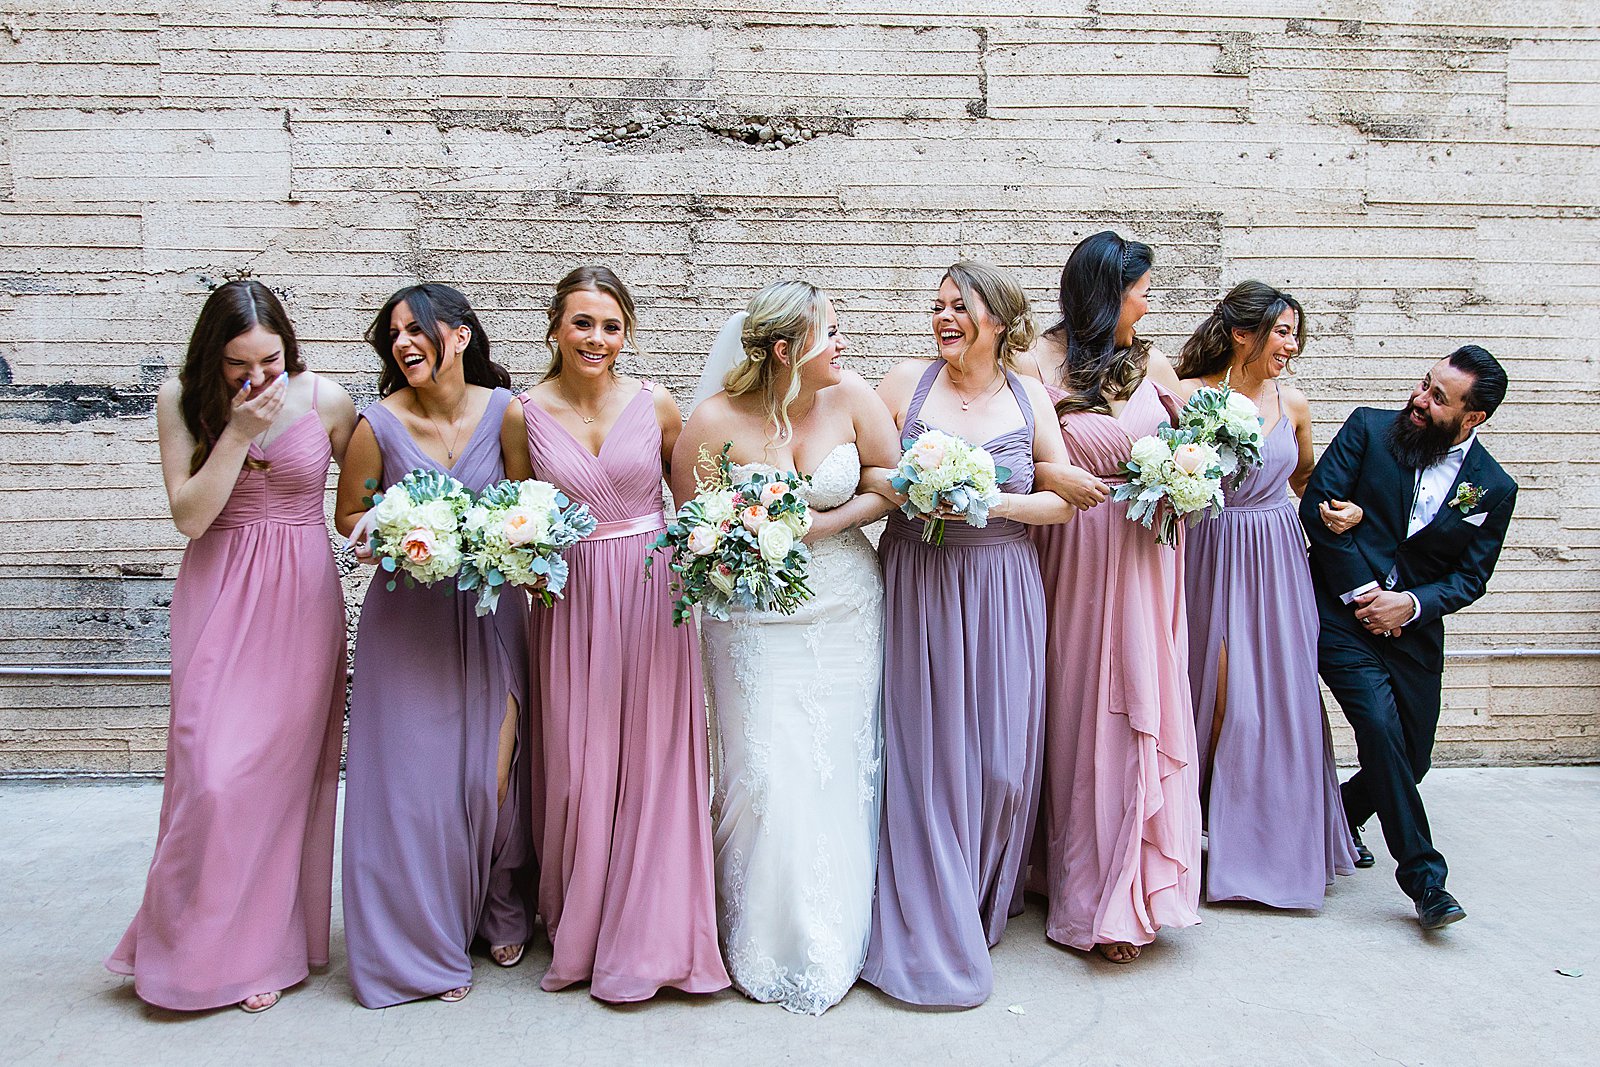 Bride and bridesmaids laughing together at The Ice House wedding by Phoenix wedding photographer PMA Photography.